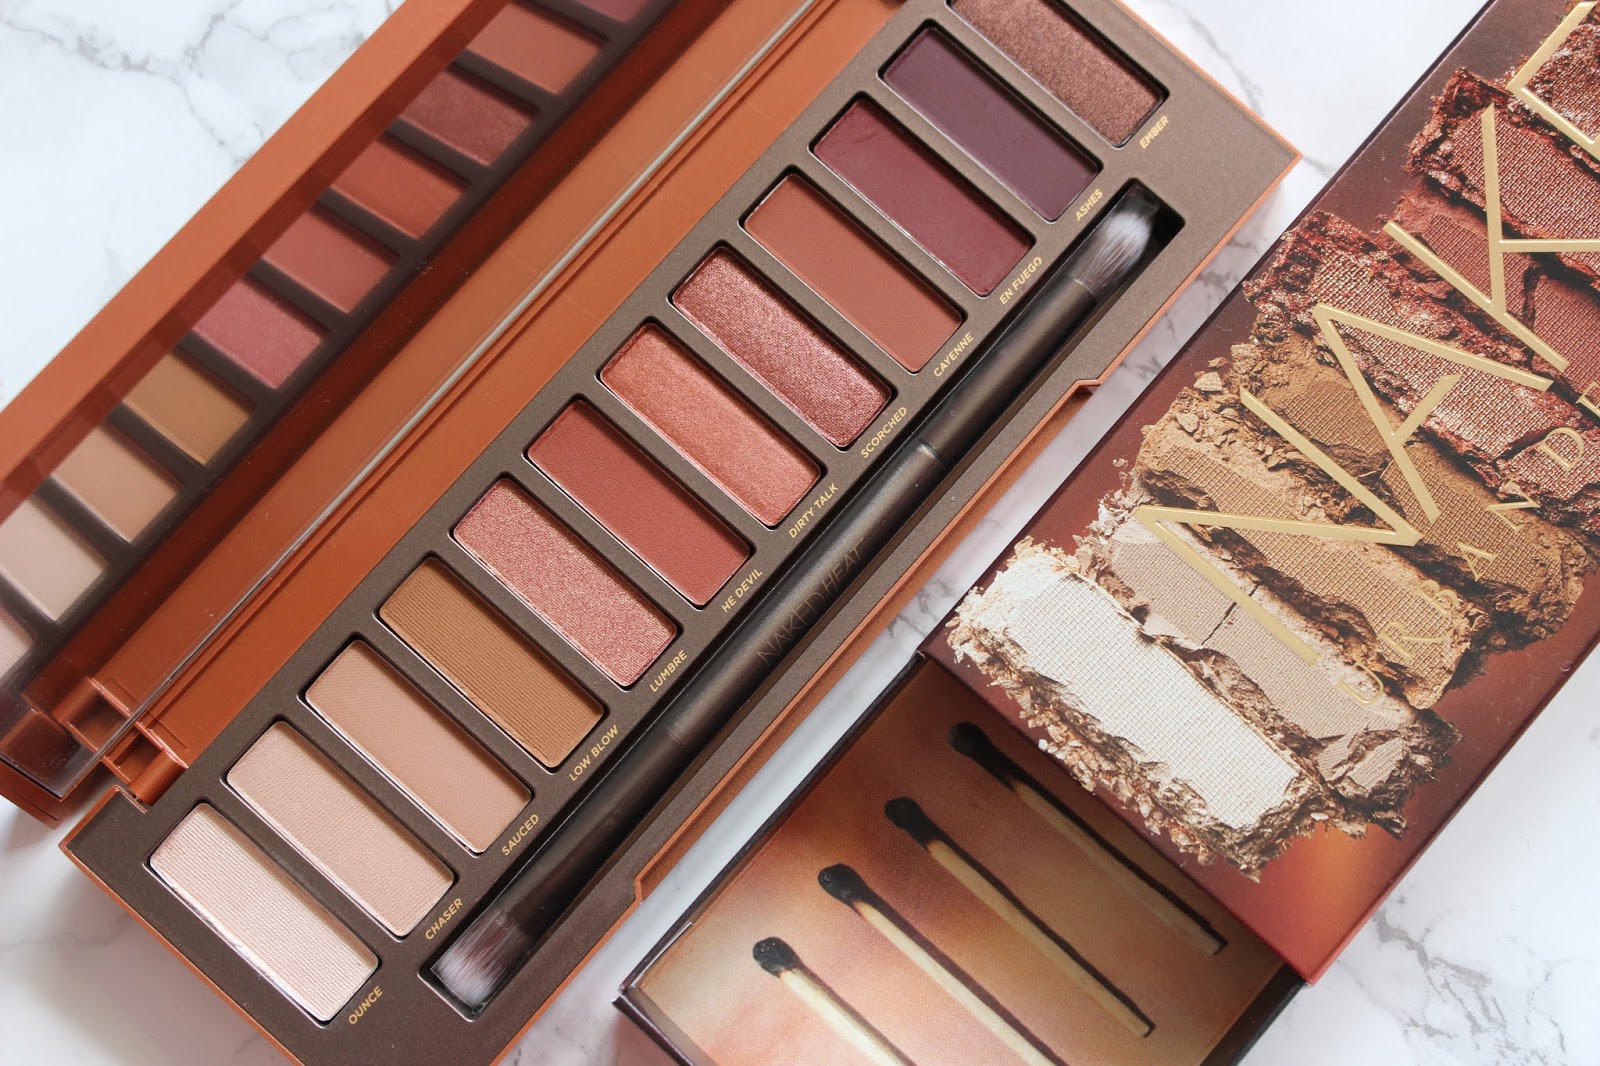 Urban Decay Naked Heat Eyeshadow Palette | Review & Swatches 